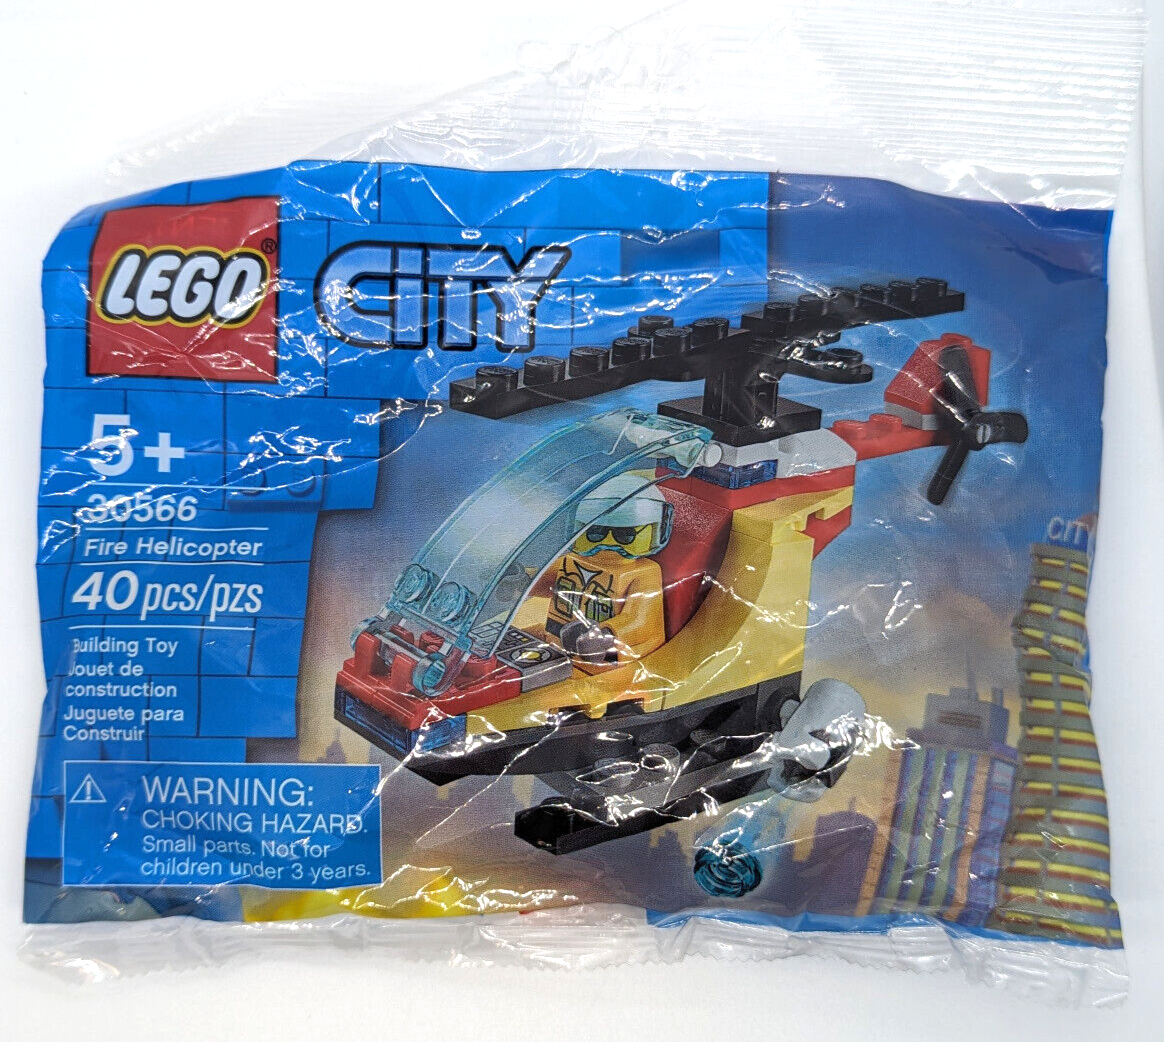 New LEGO Town City Fire 30566 - Helicopter Pilot Polybag